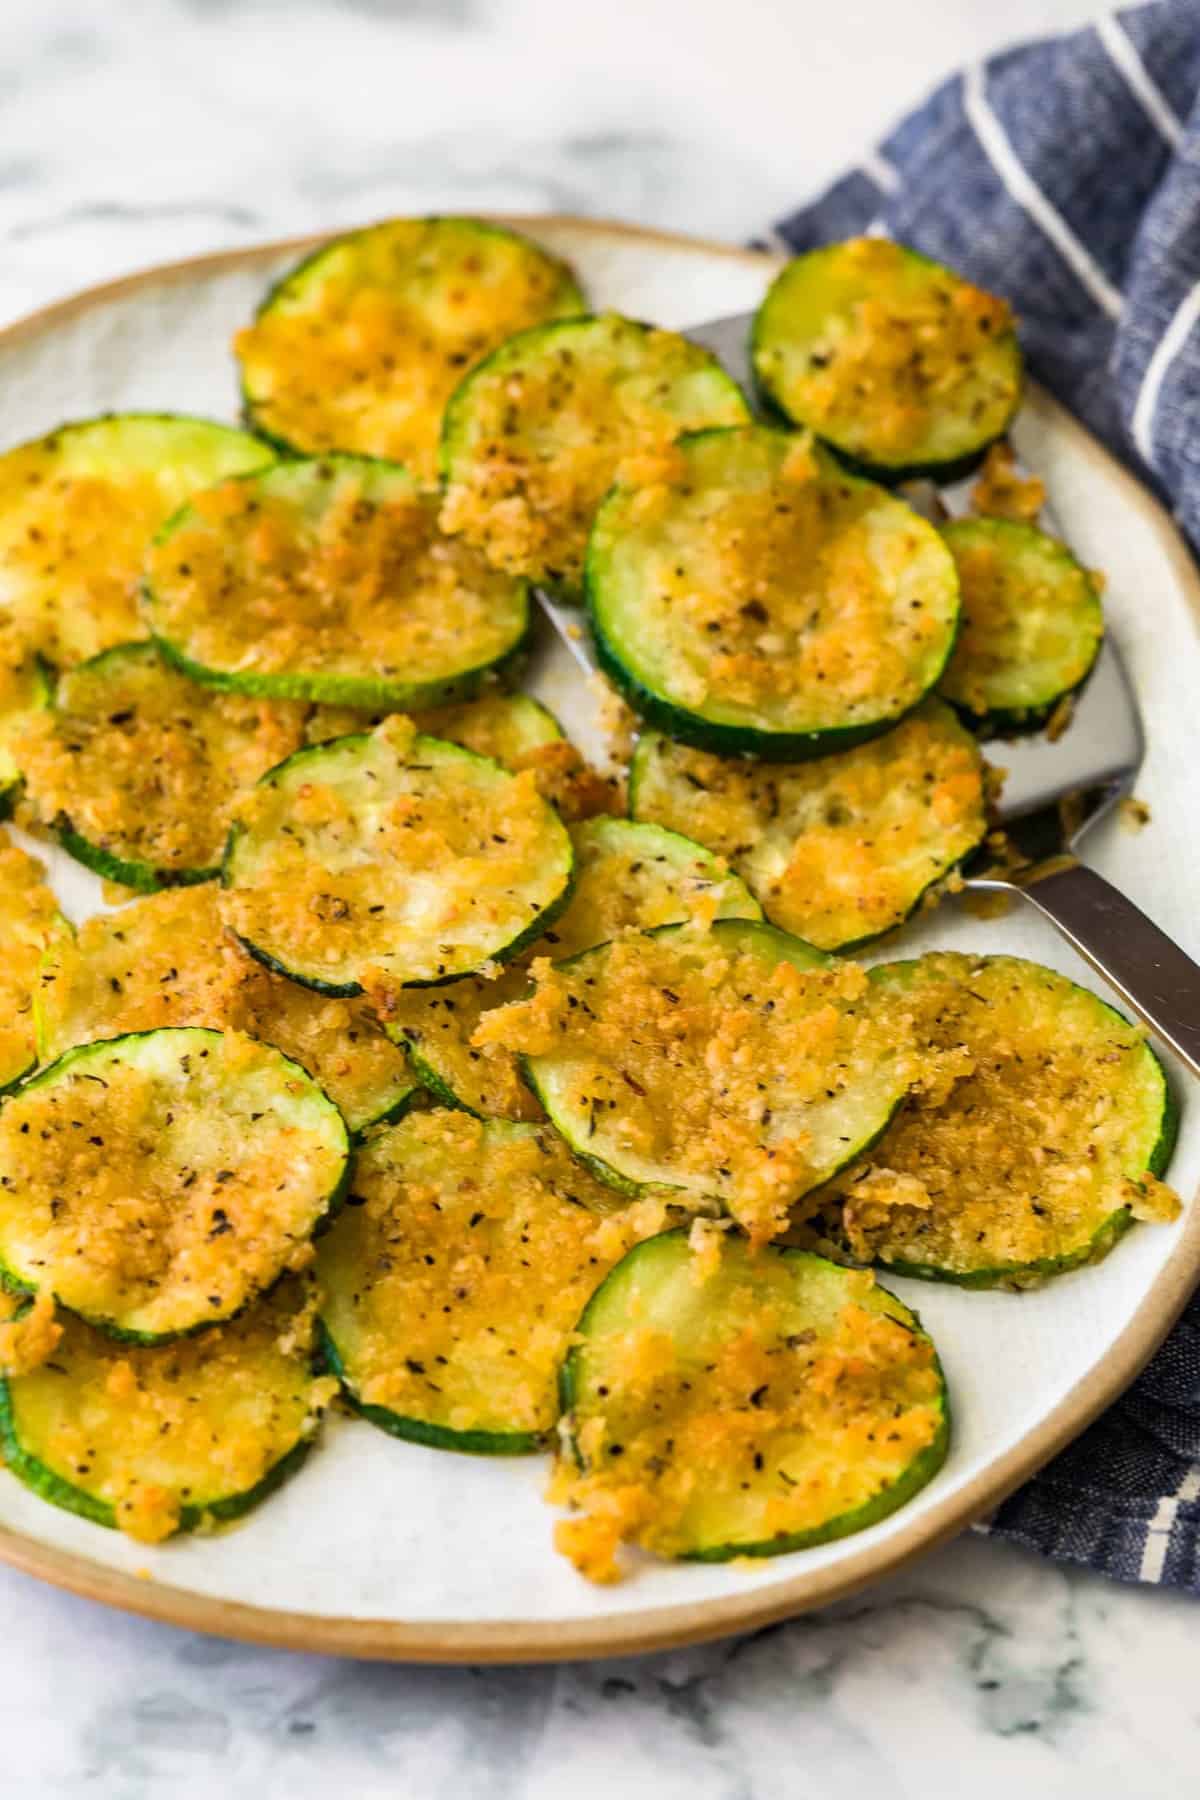 Crispy Baked Zucchini Recipe (Easy and Cheesy!) – Cravings Happen